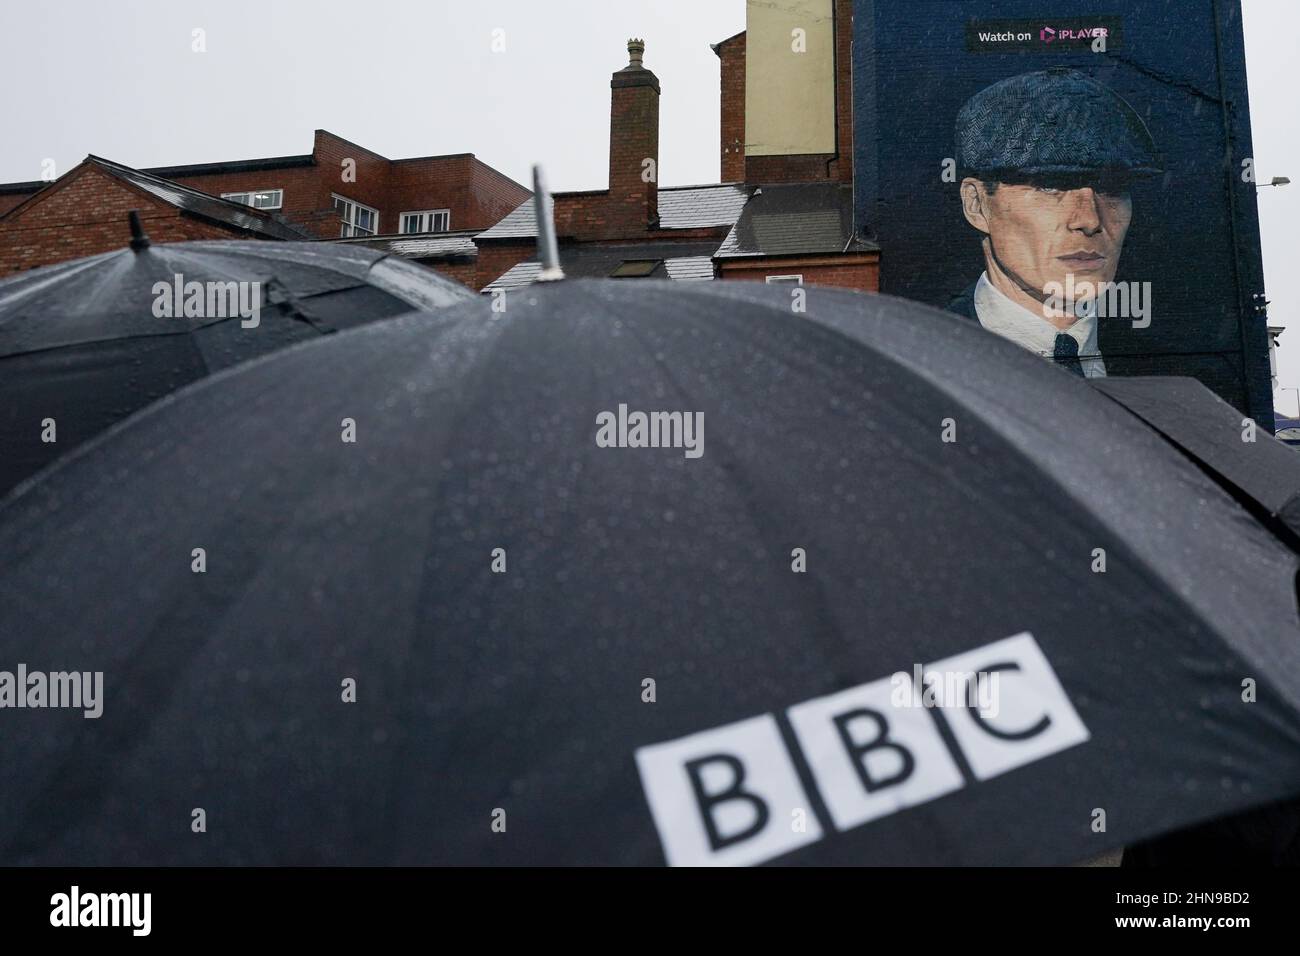 A mural by artist Akse P19, of actor Cillian Murphy, as Peaky Blinders crime boss Tommy Shelby, in the historic Deritend area of Birmingham, ahead of the sixth and final series of the hit BBC One crime series. Picture date: Tuesday February 15, 2022. Stock Photo